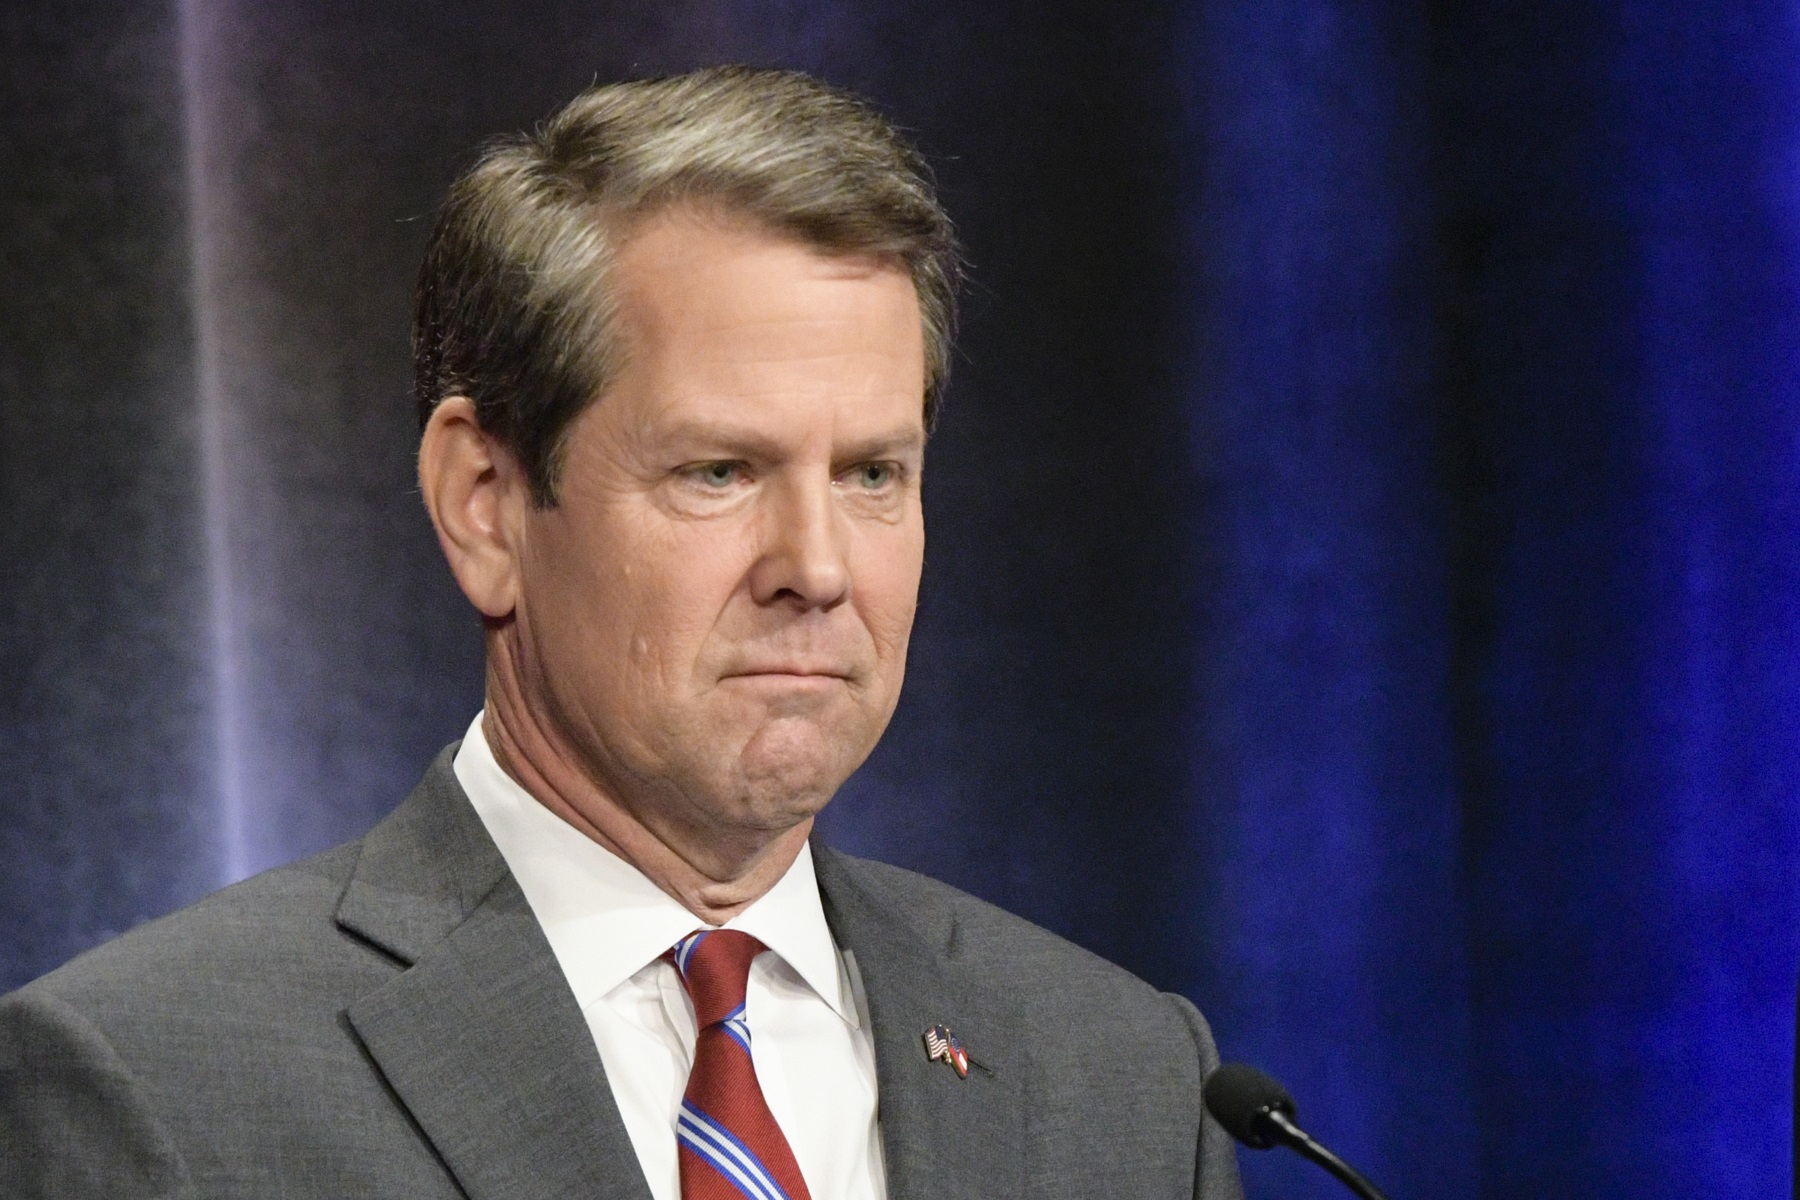 brian-kemp-wants-to-give-georgians-at-least-250-tax-rebate-with-state